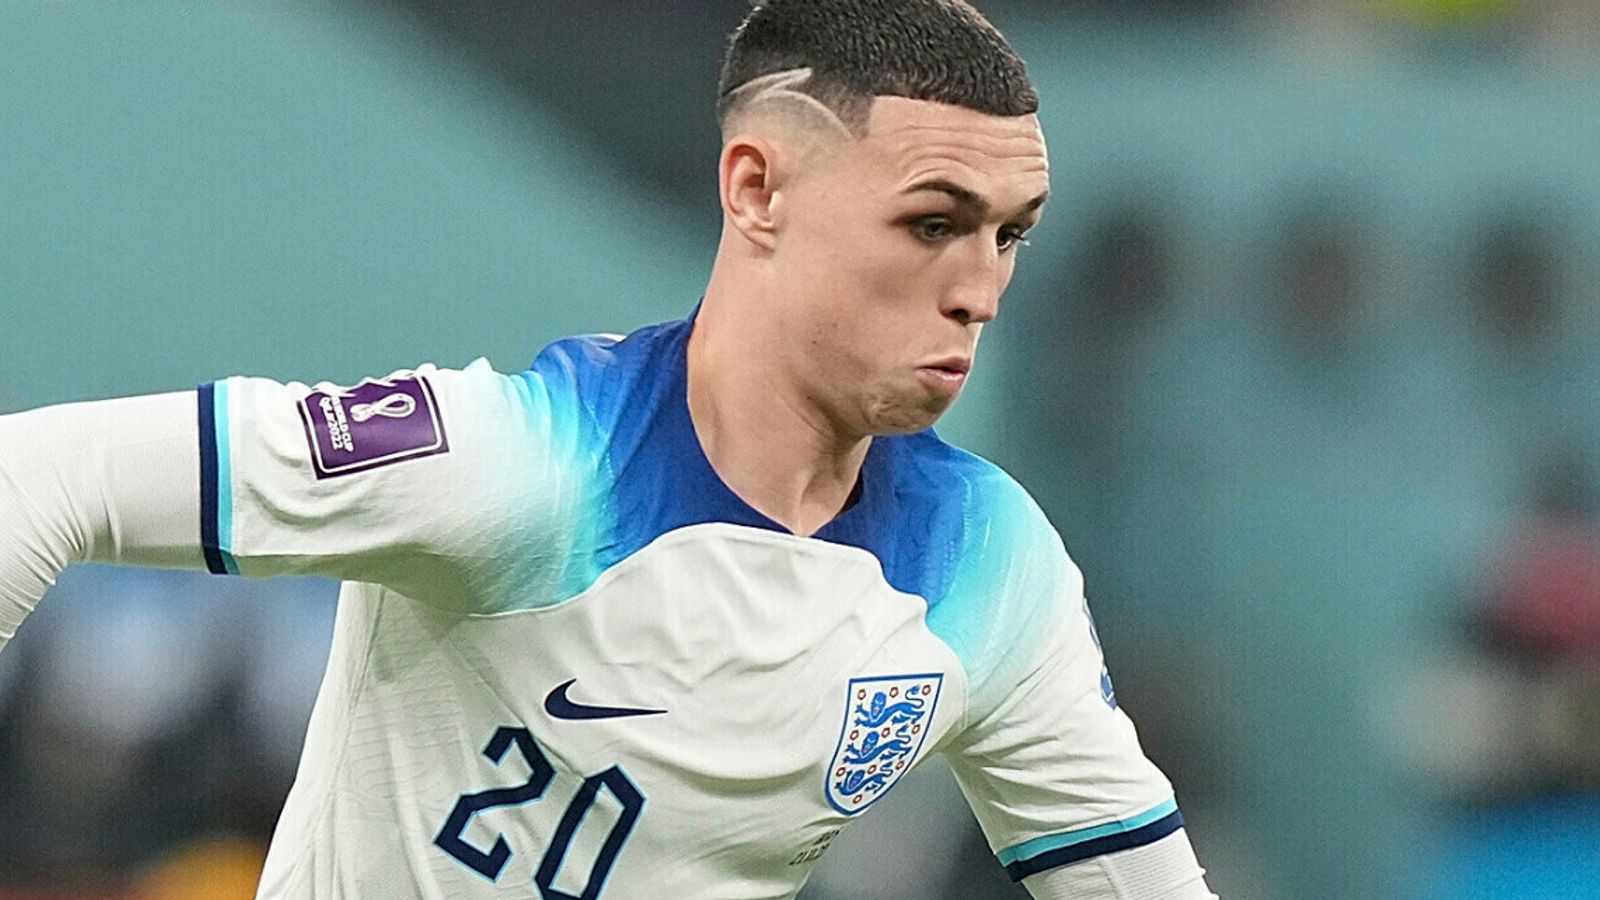 Foden played in England's first game, coming off the bench